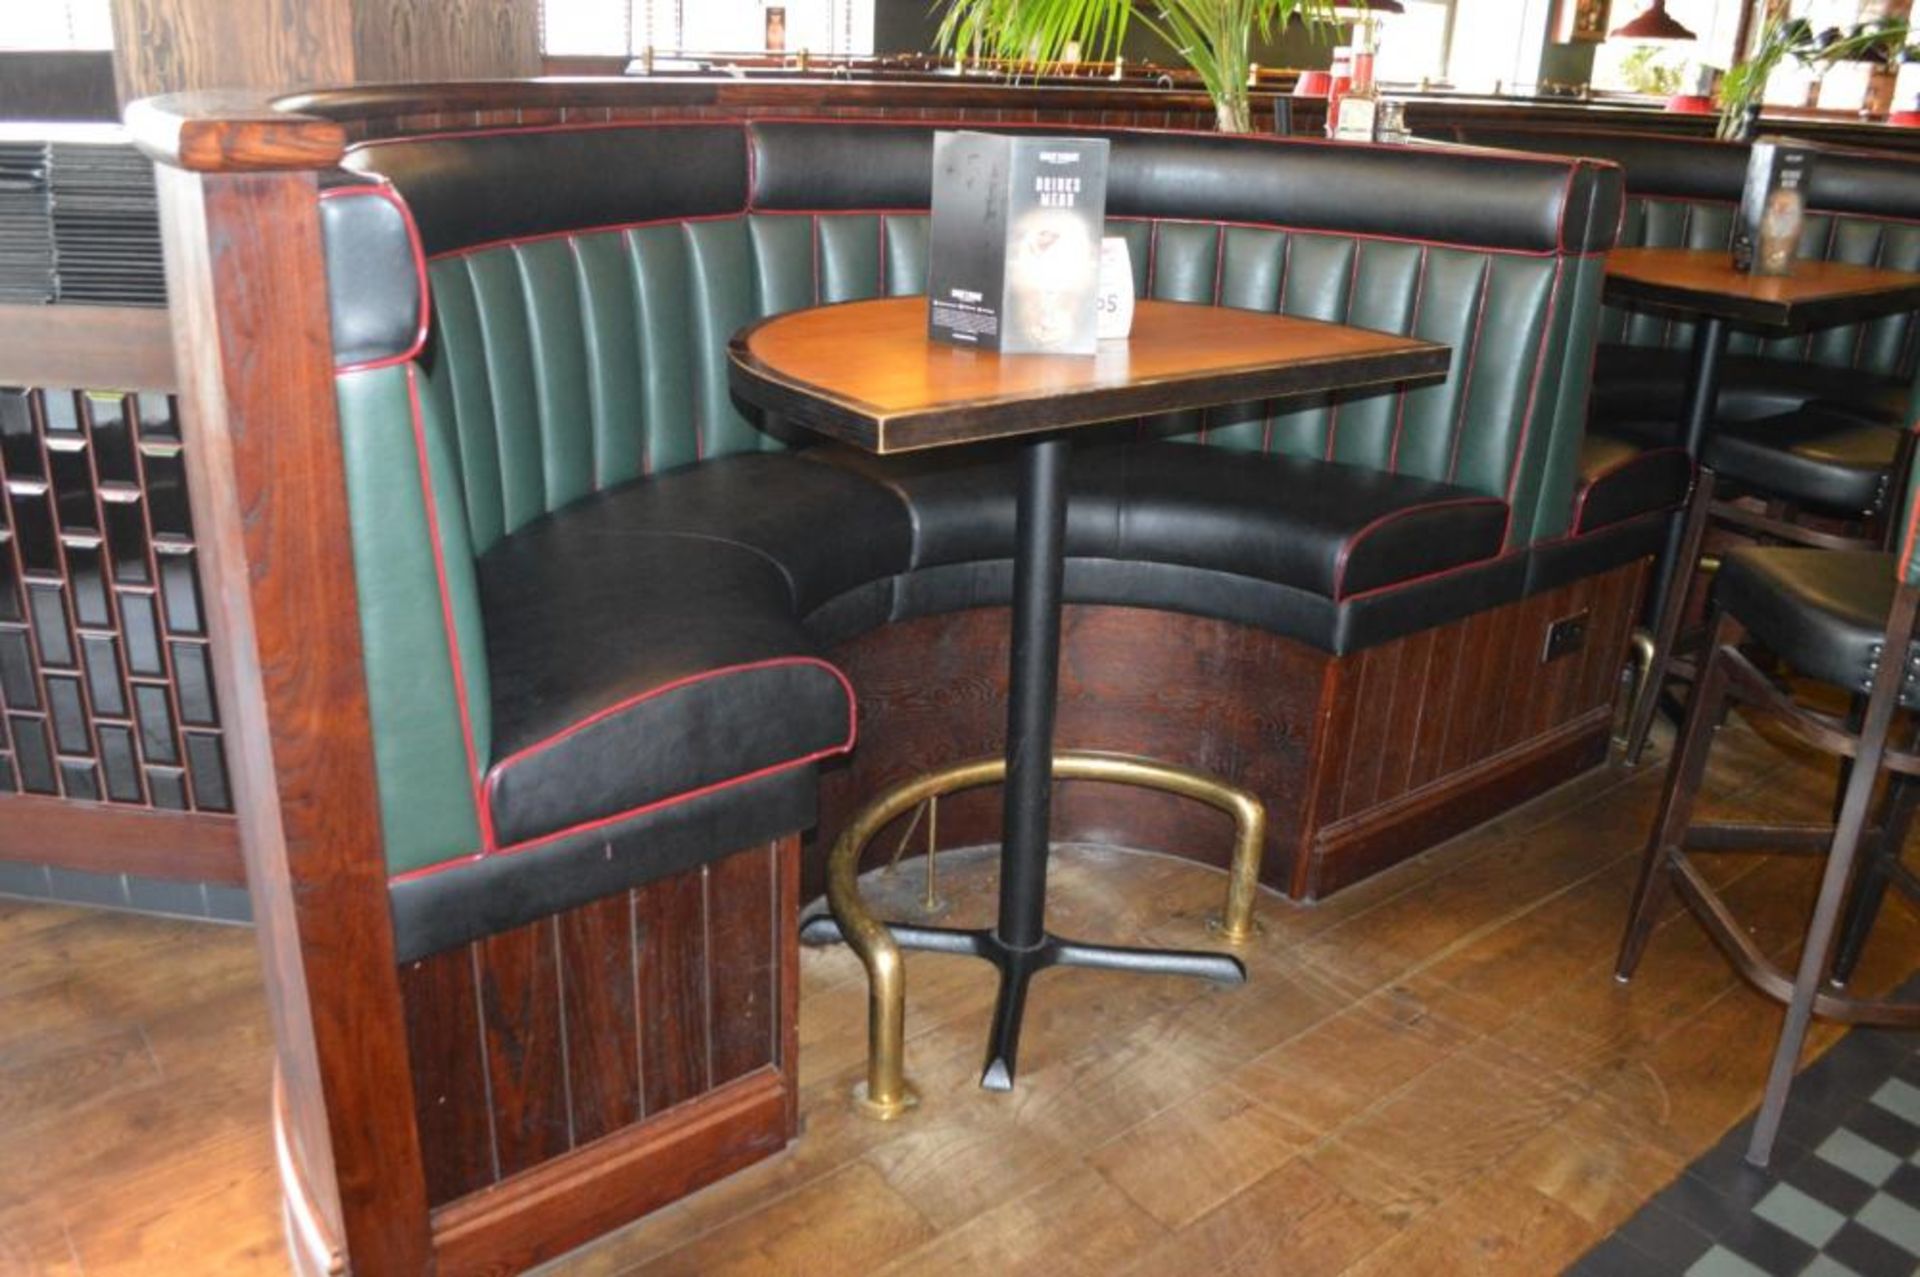 5 x Contemporary Half Circle High Seat Booths - Features a Leather Upholstery in Green and Black, - Image 3 of 11